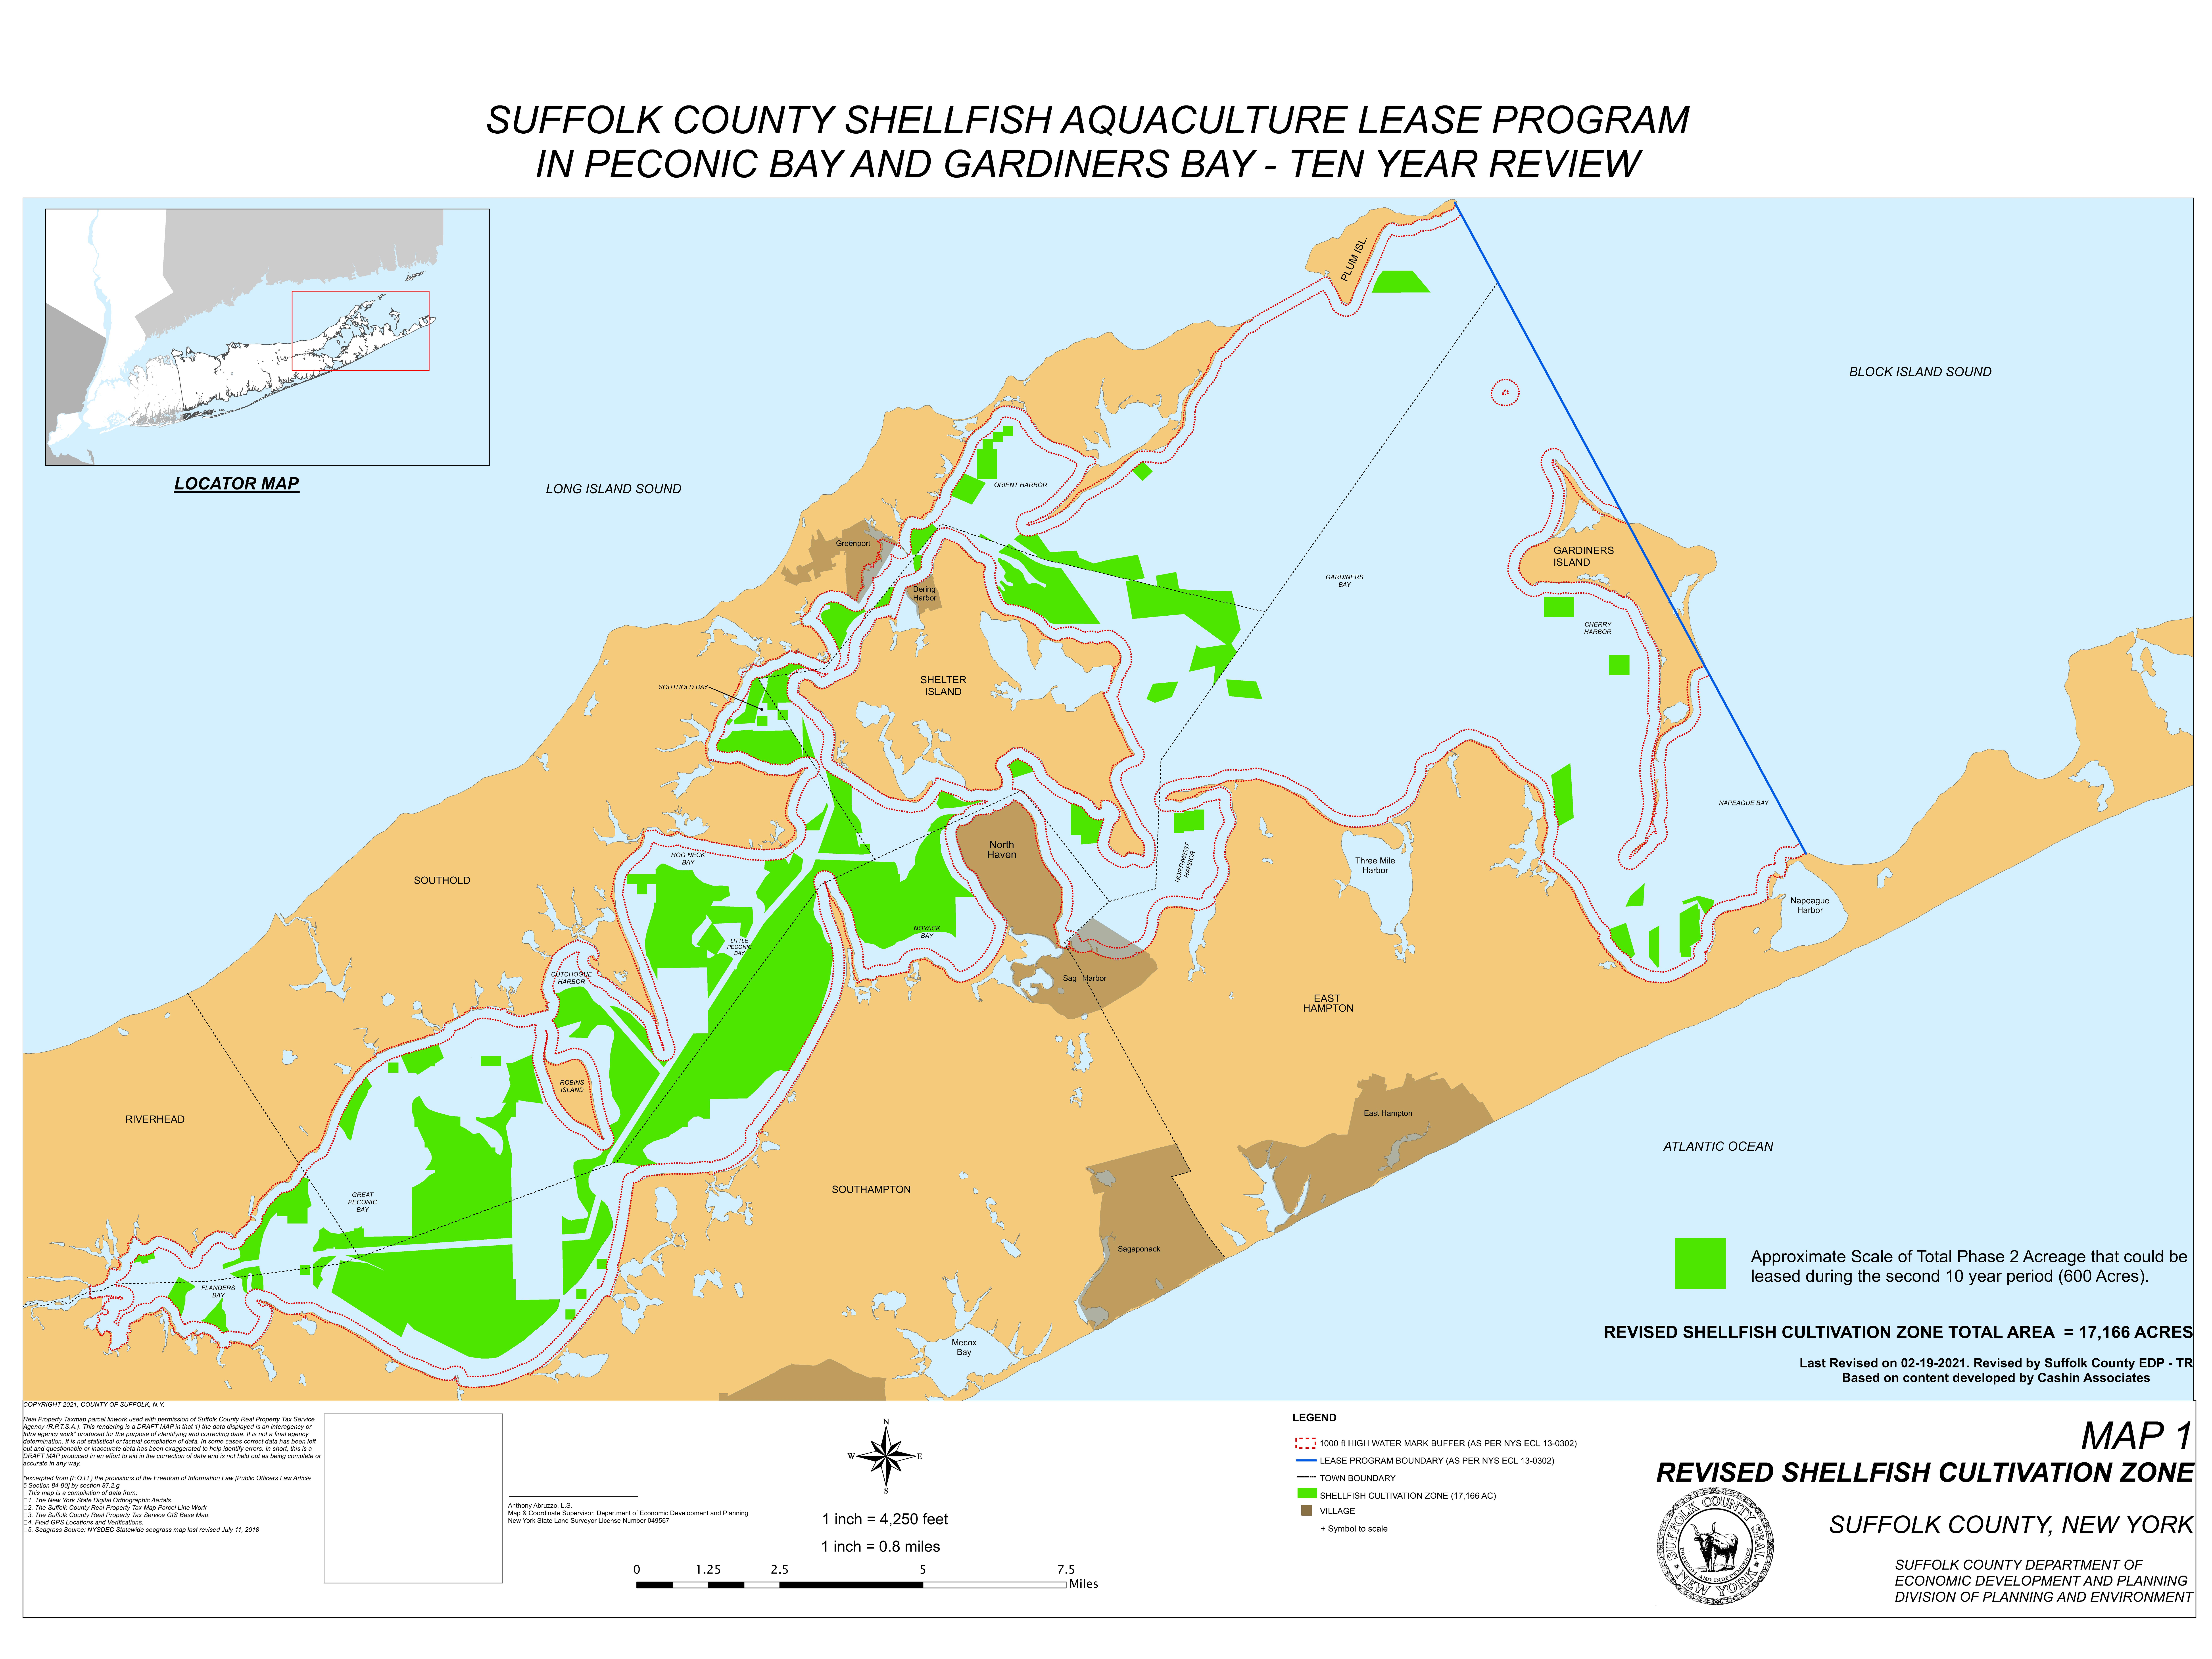 Map 1 Revised Shellfish Cultivation Zone